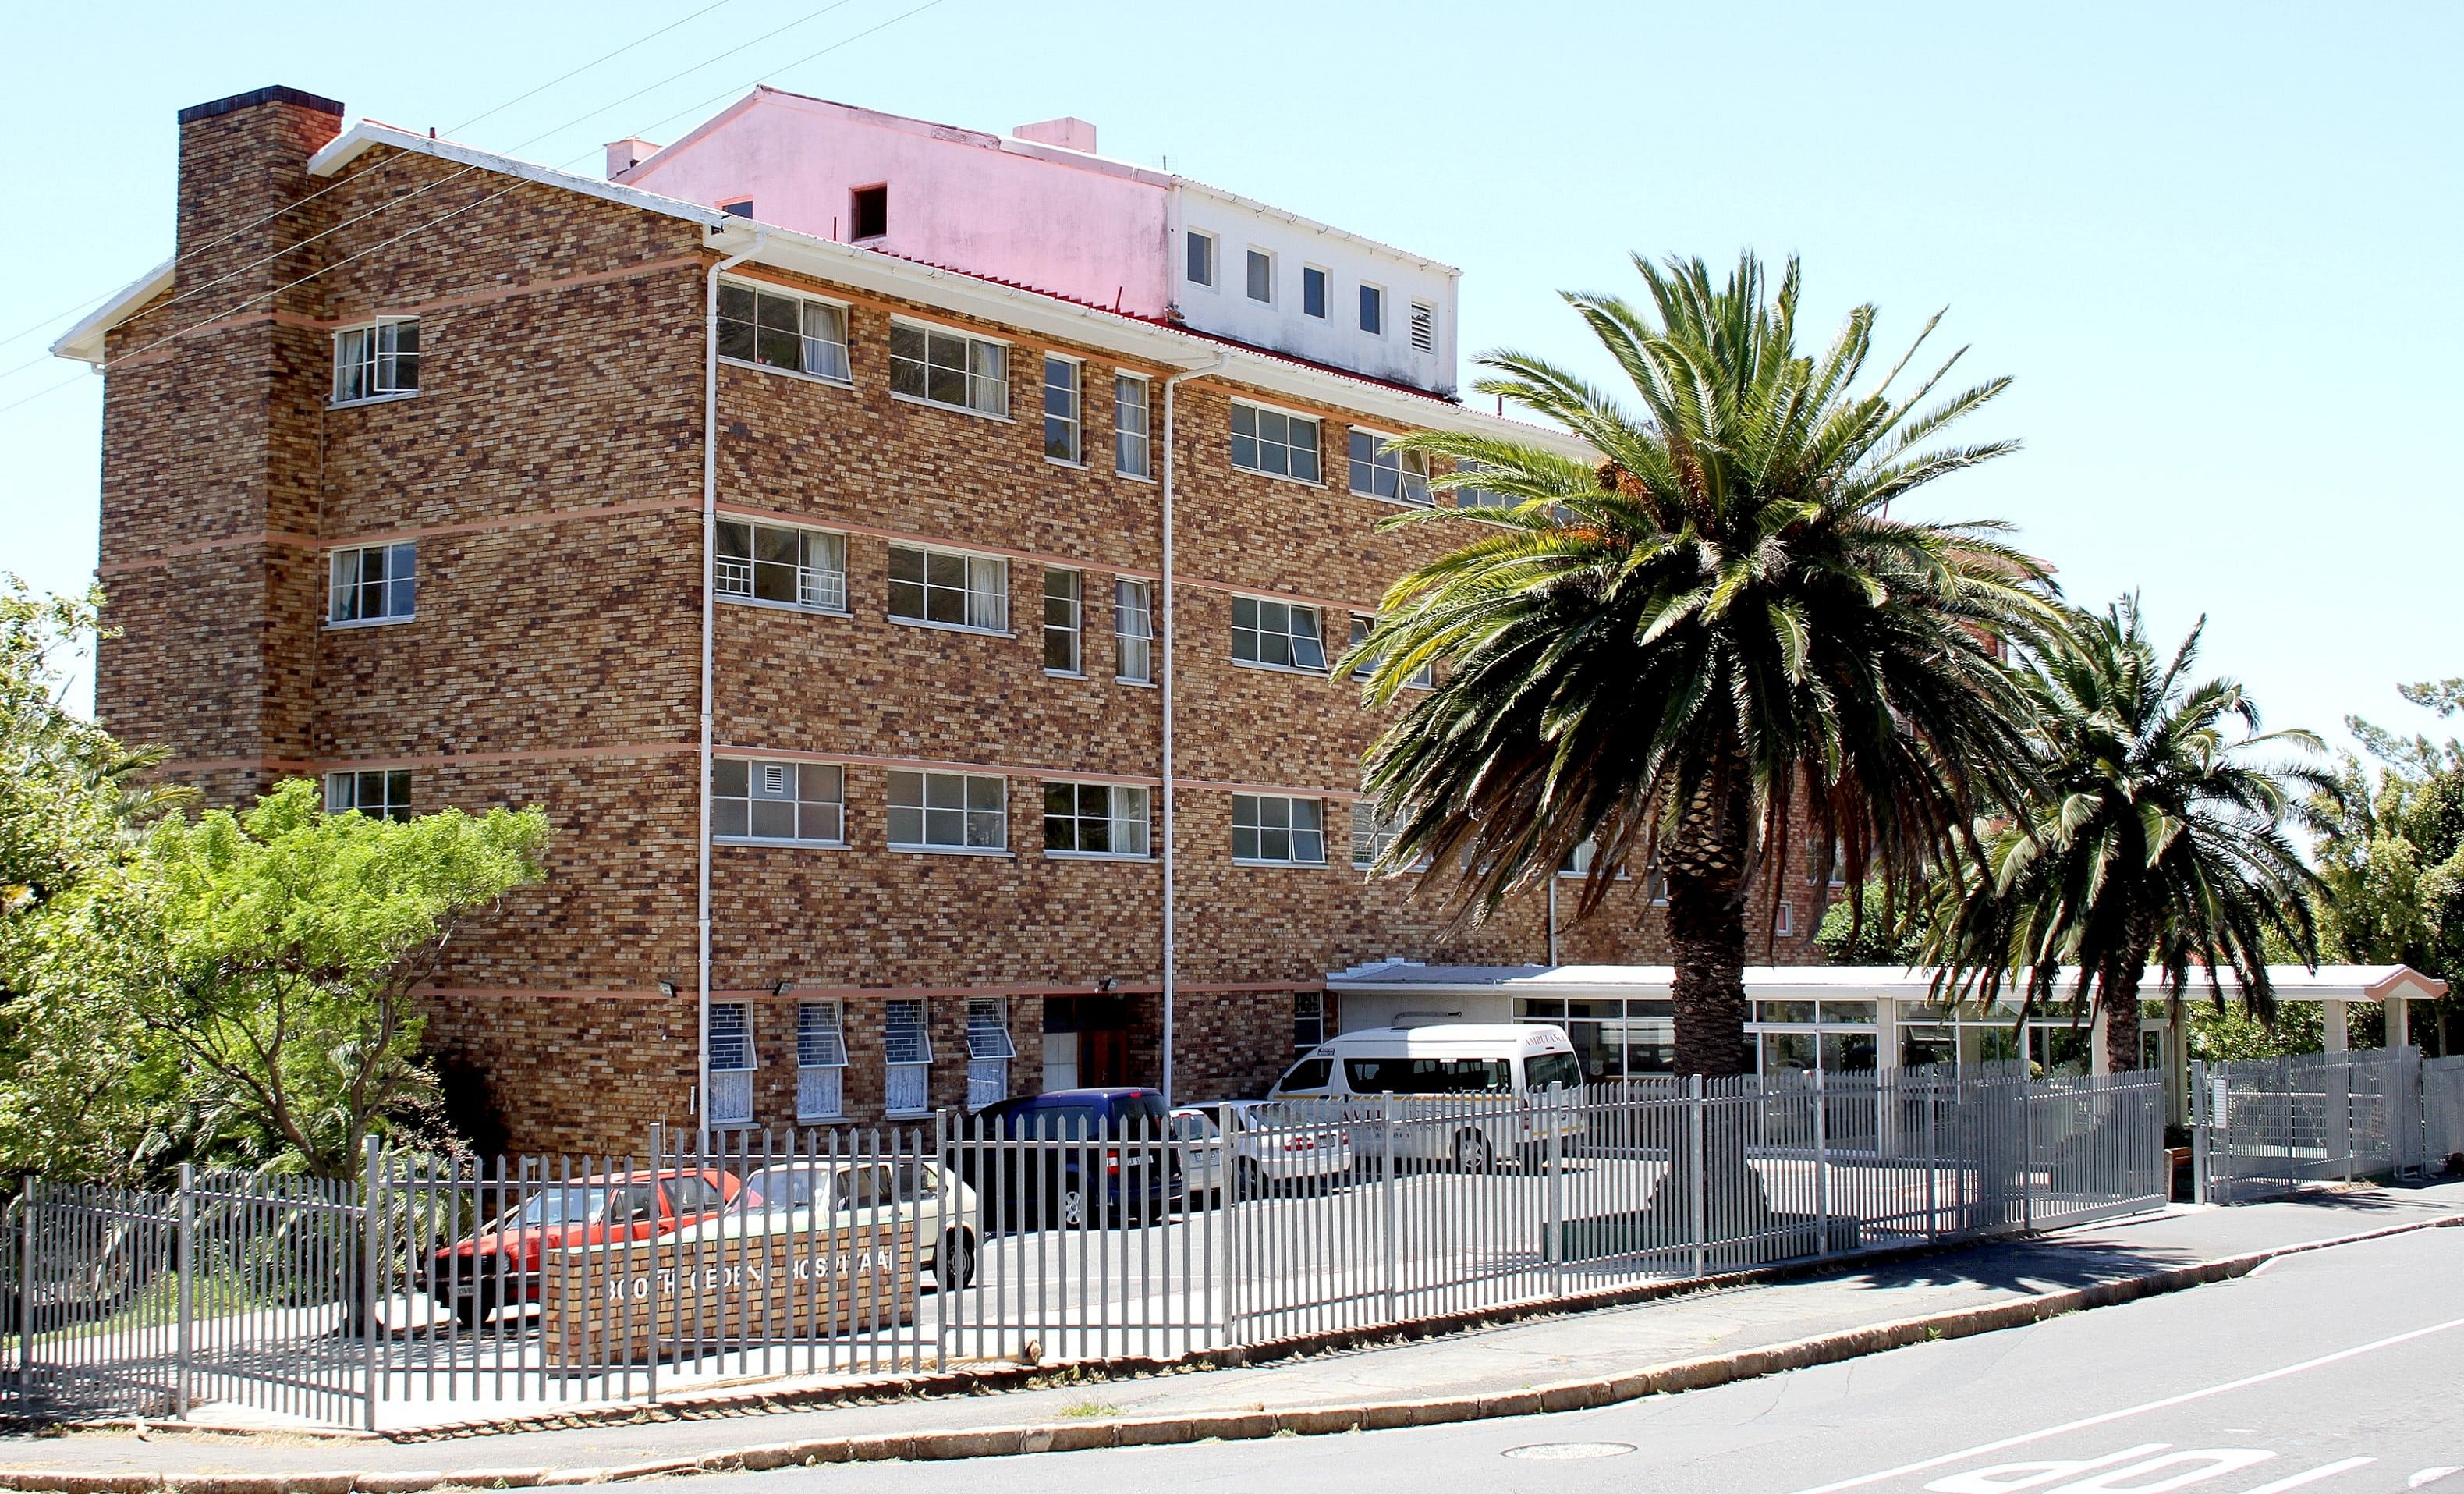 Booth Memorial Hospital Oranjezicht Cape Town South Africa. (Credit: Wikimedia Commons Photo)